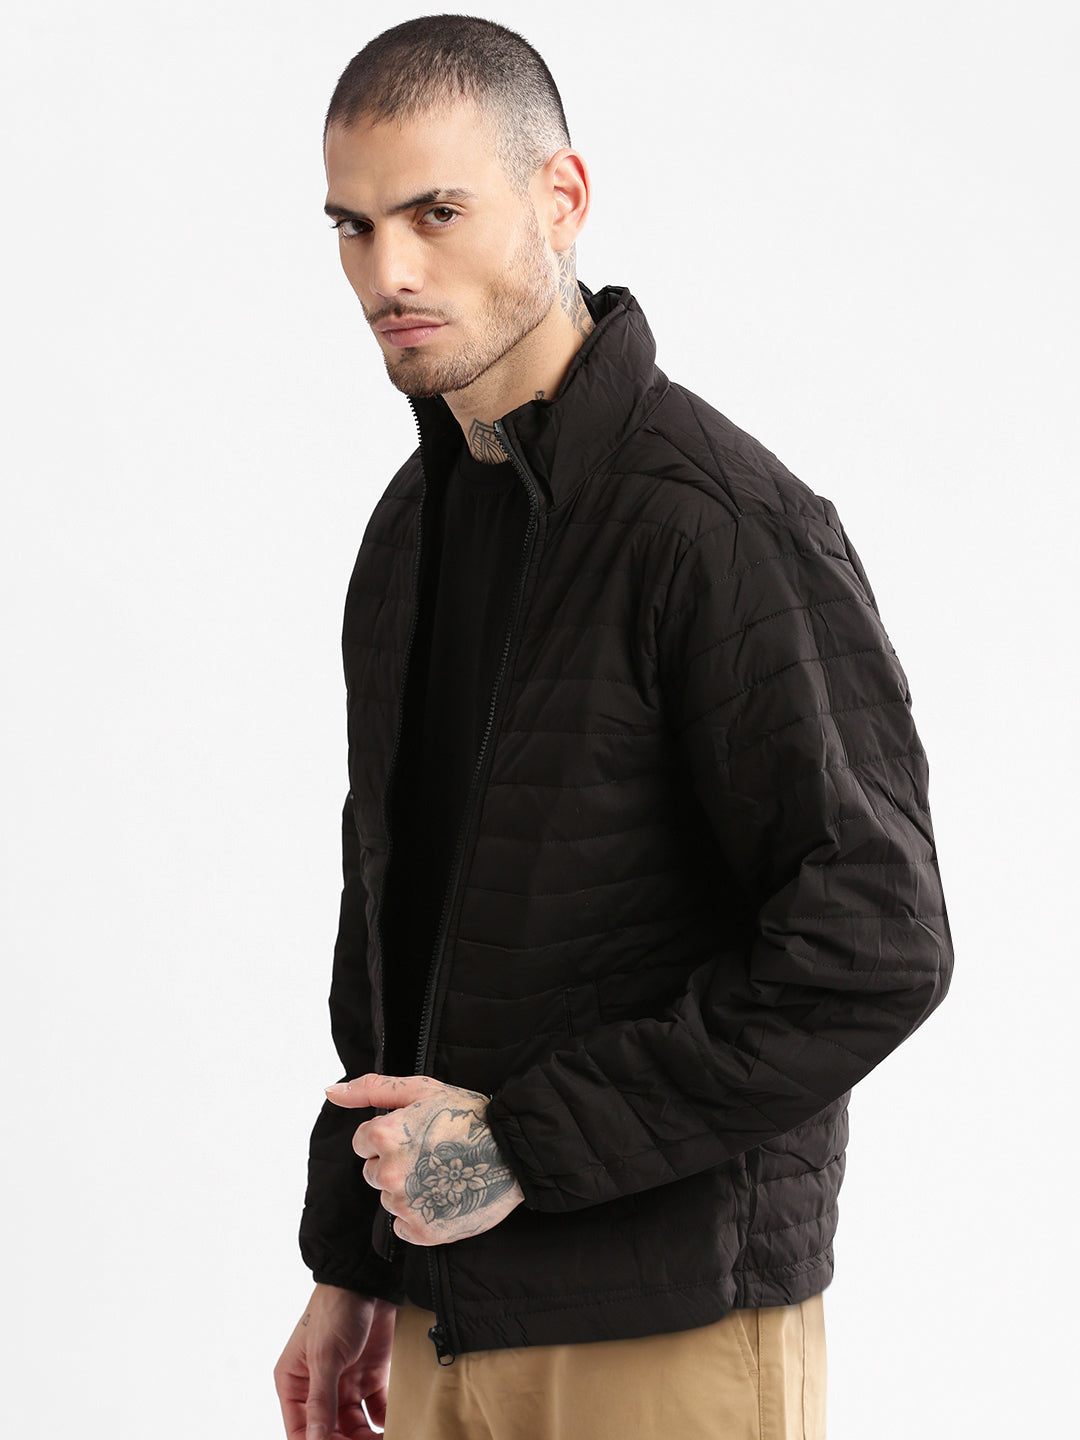 Men Hooded Olive Solid Tailored Oversized Jacket comes with Detachable Hoodie and Inner Jacket